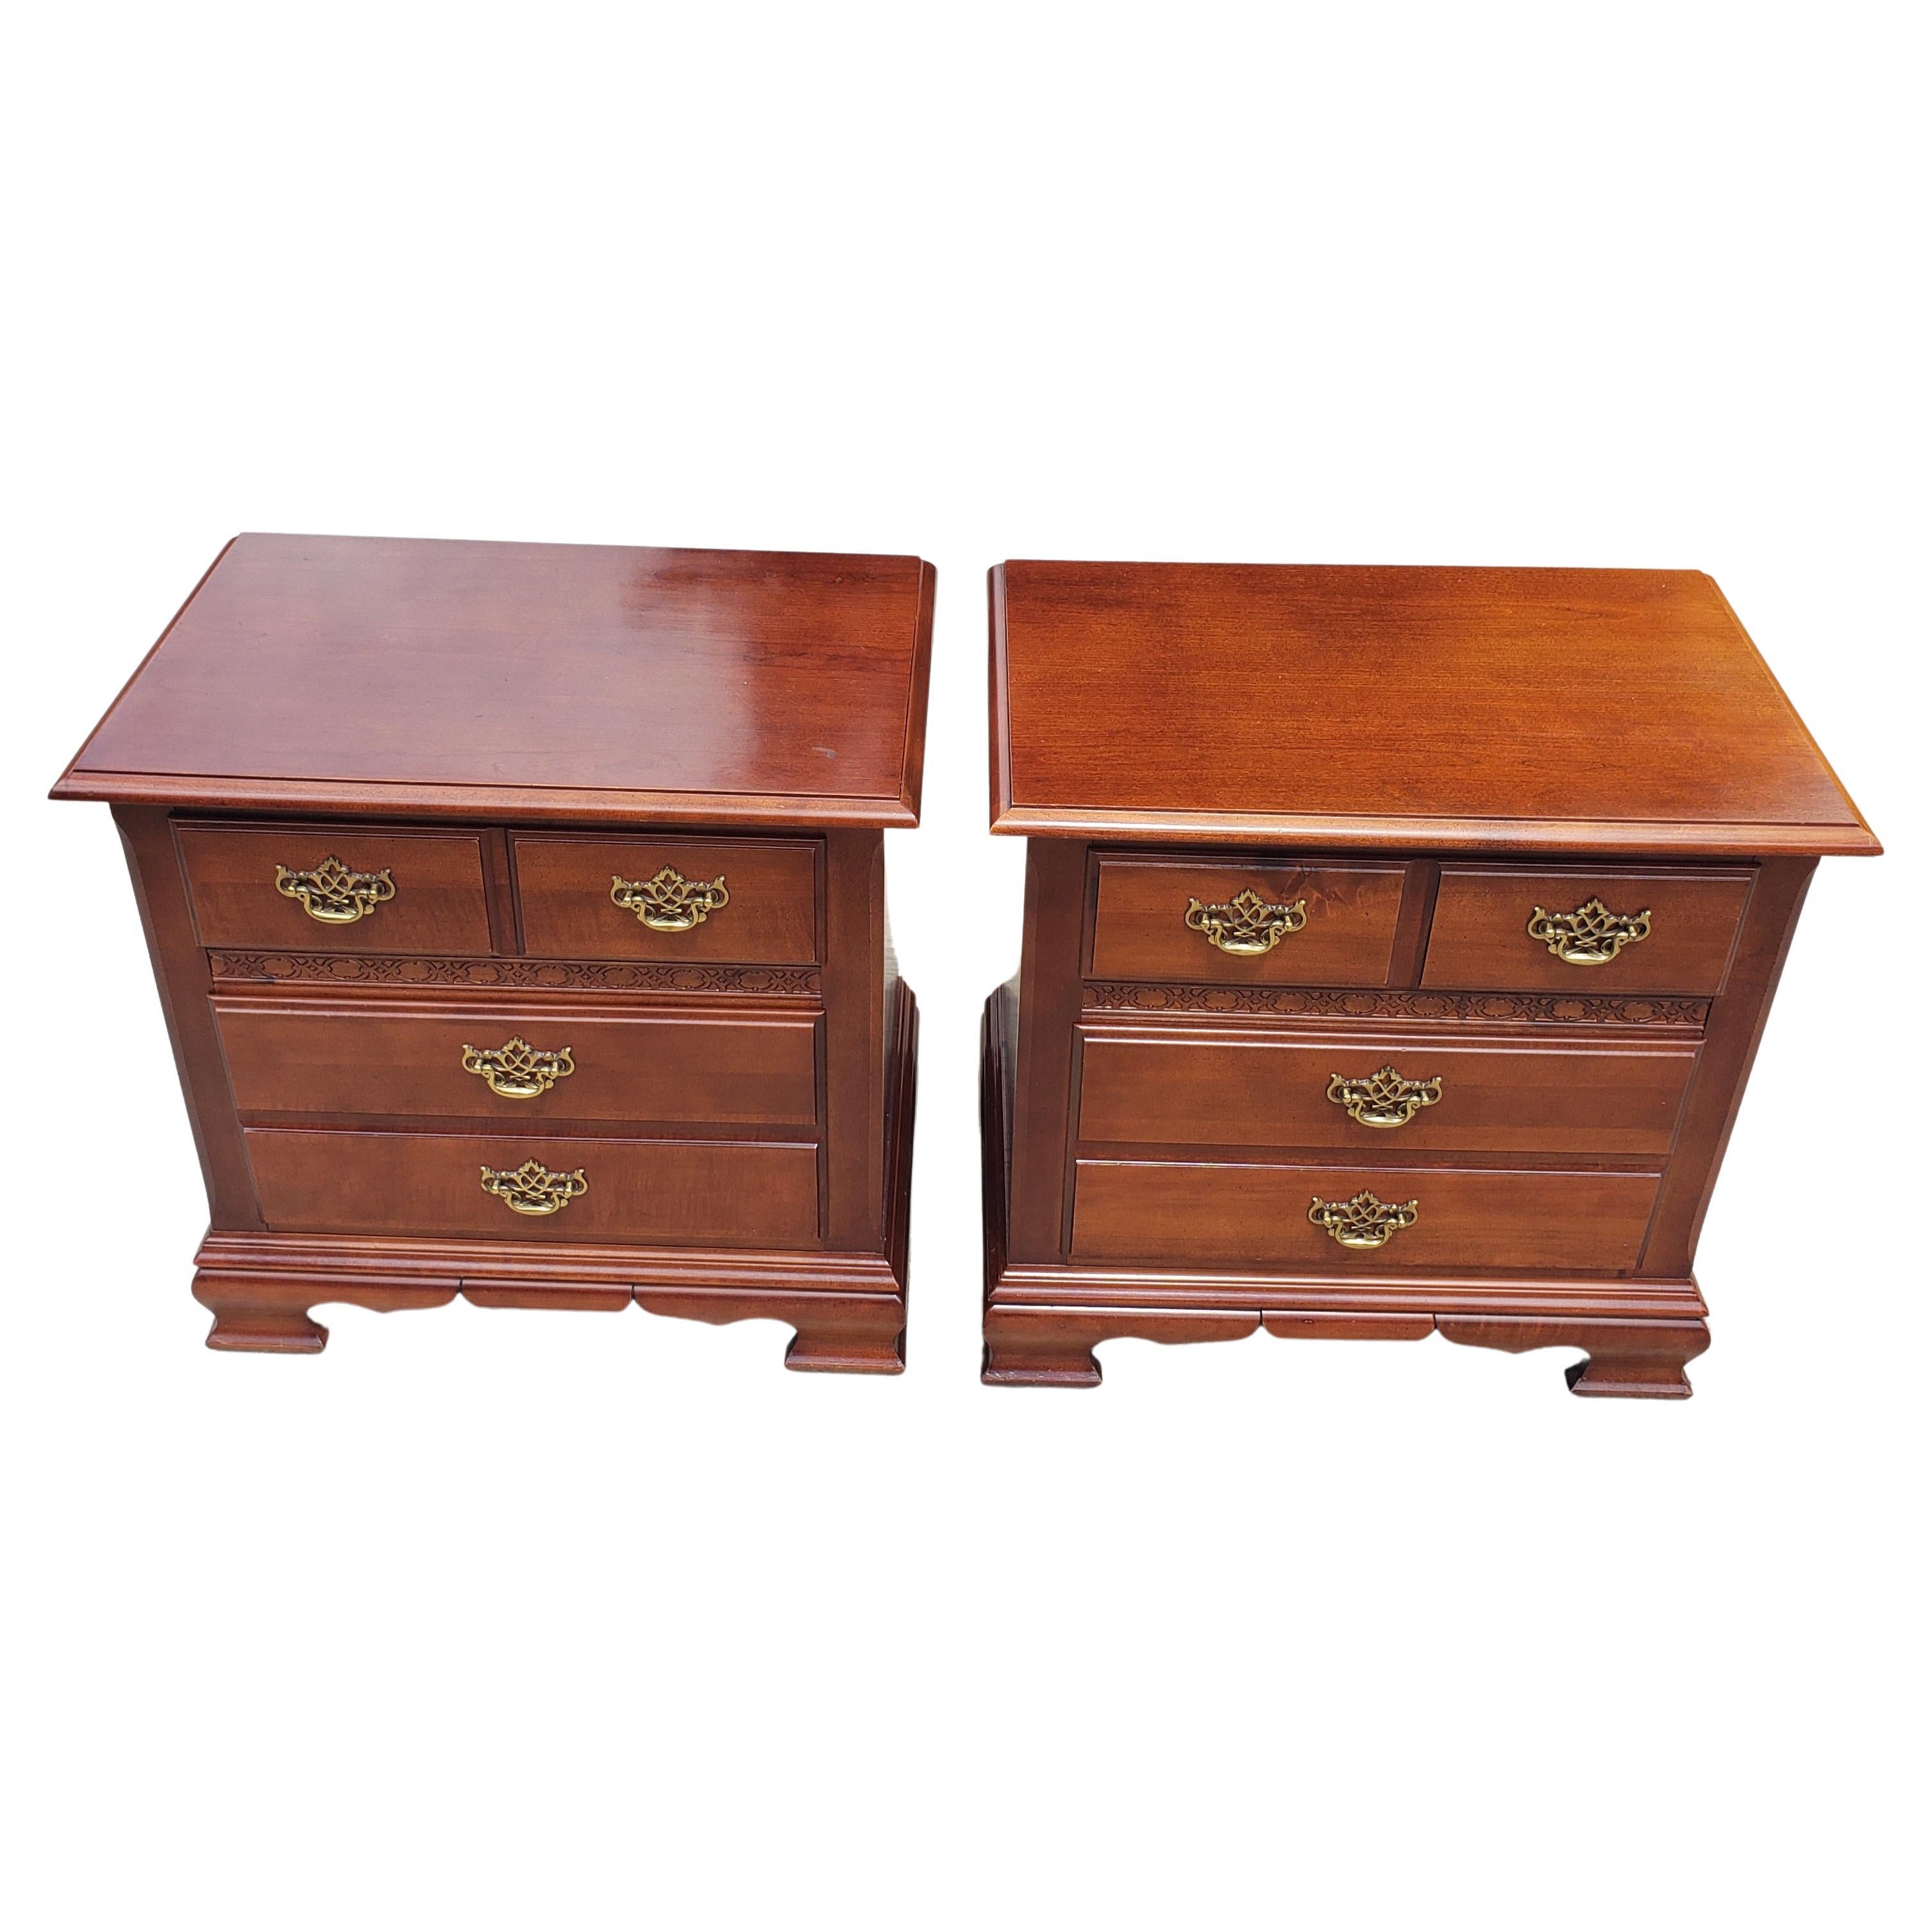 A gorgeous pair of Stanley Furniture Chippendale Mahogany Bedside Tables Nightstands in very good vintage condition.
They measure 26